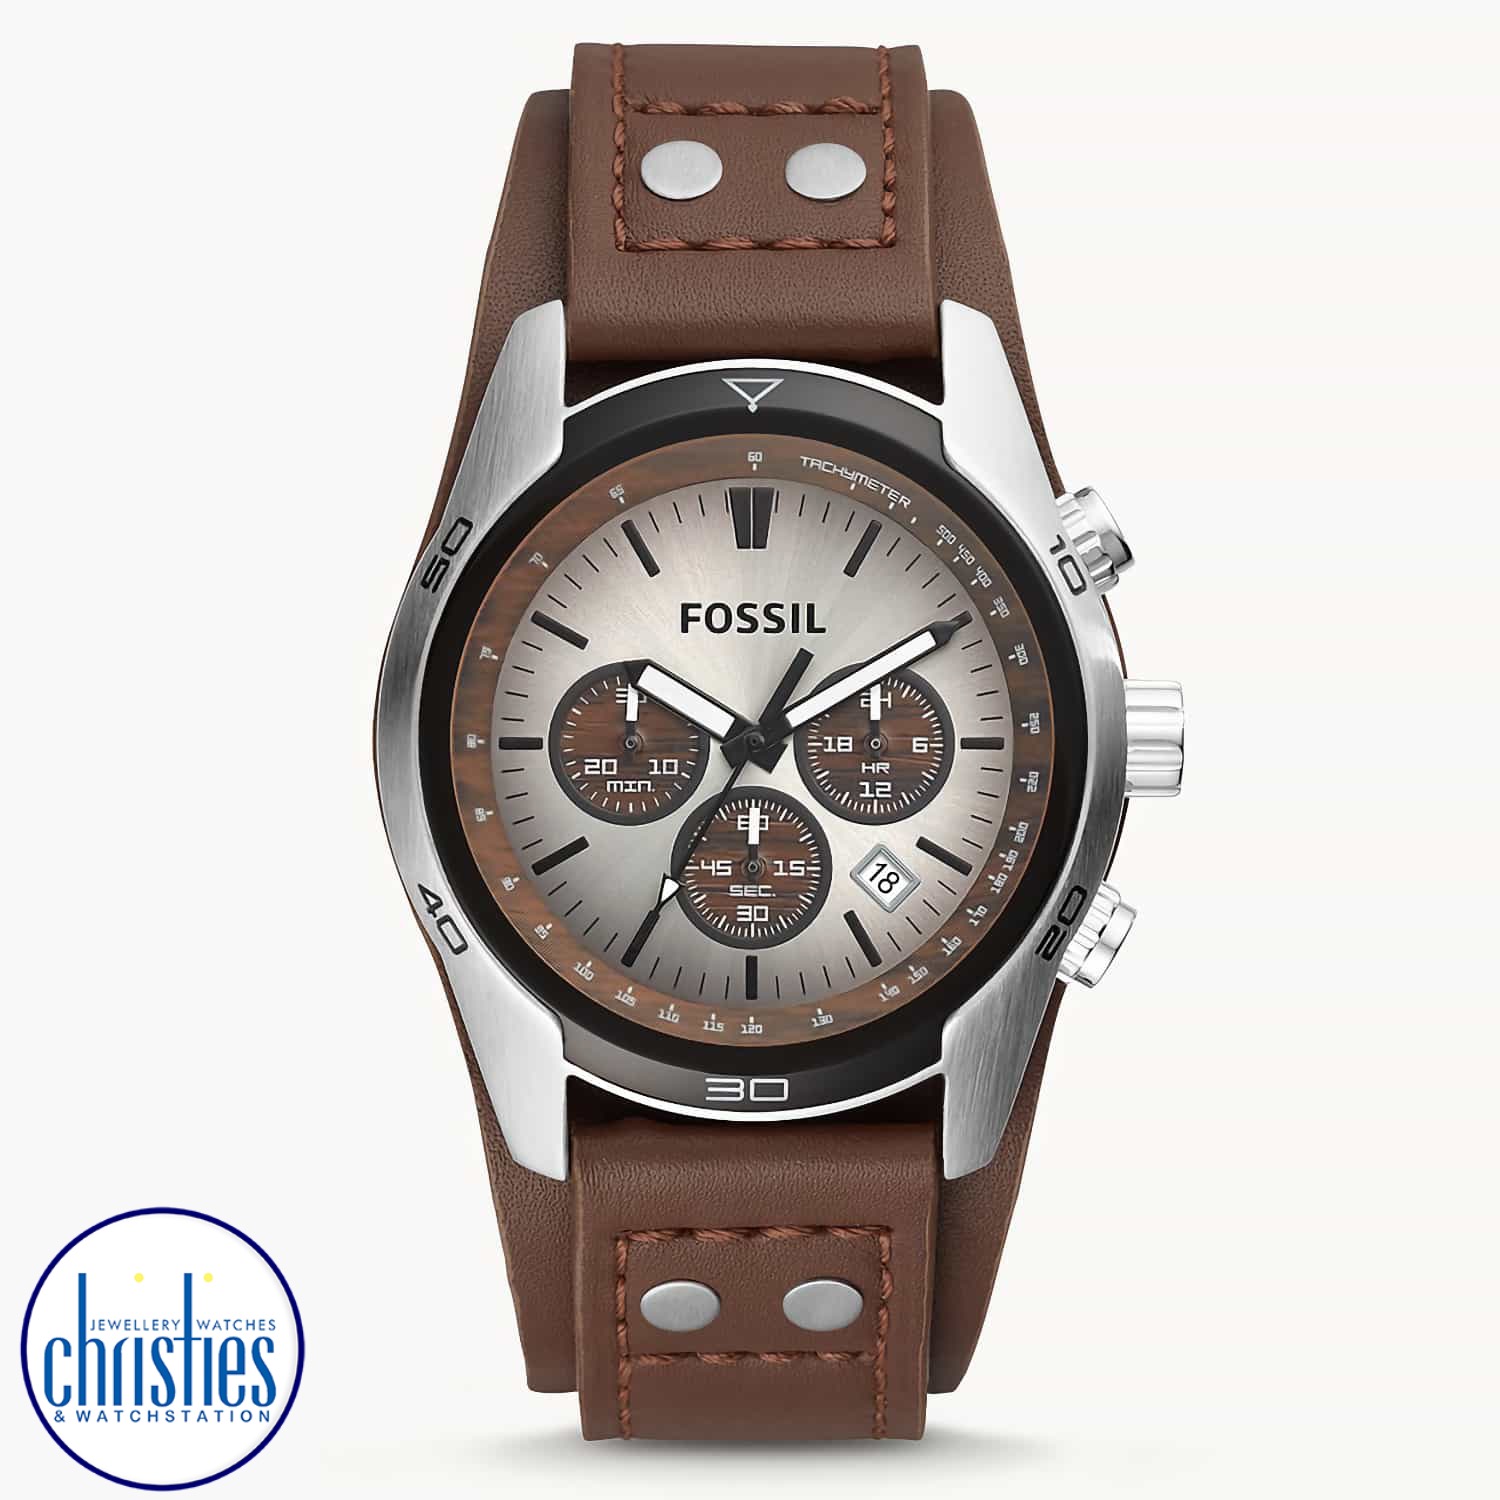 CH2565  Fossil Coachman Chronograph Brown Leather Watch. CH2565  Fossil Coachman Chronograph Brown Leather Watch Afterpay - Split your purchase into 4 instalments - Pay for your purchase over 4 instalments, due every two weeks. You’ll pay your first insta